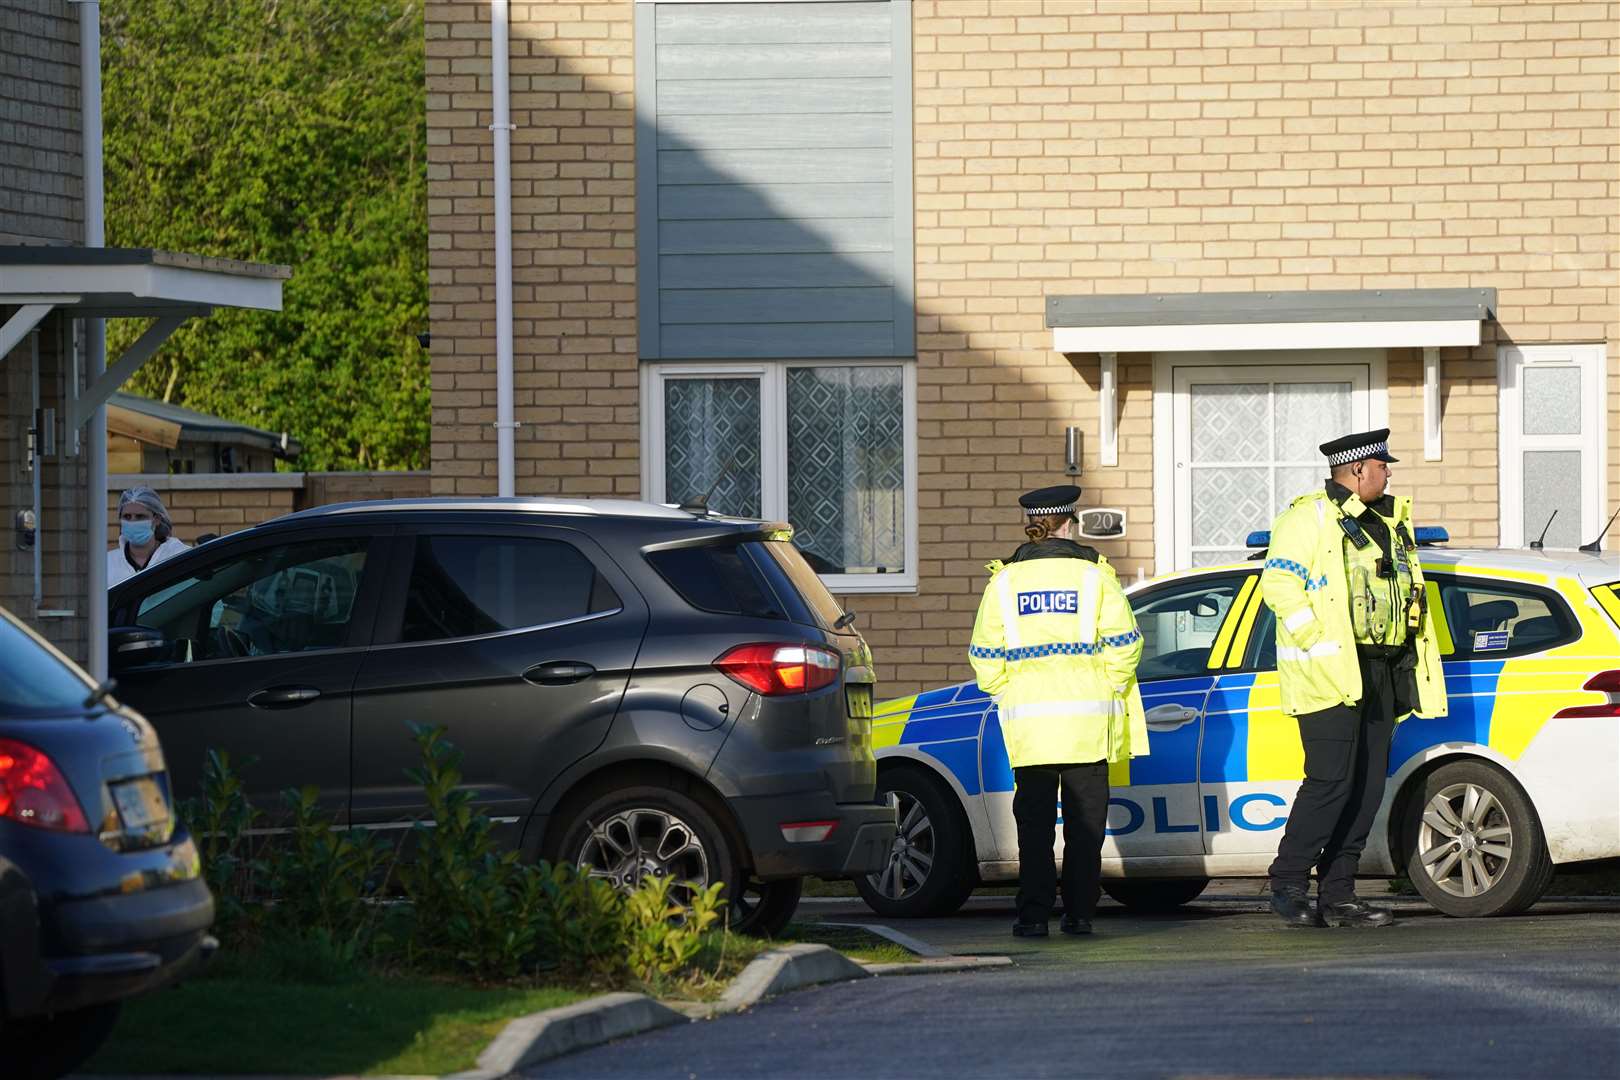 Police at the scene in Meridian Close, Bluntisham, Cambridgeshire, where police found the body of a 32-year-old man with a gunshot wound on Wednesday evening (Joe Giddens/PA)